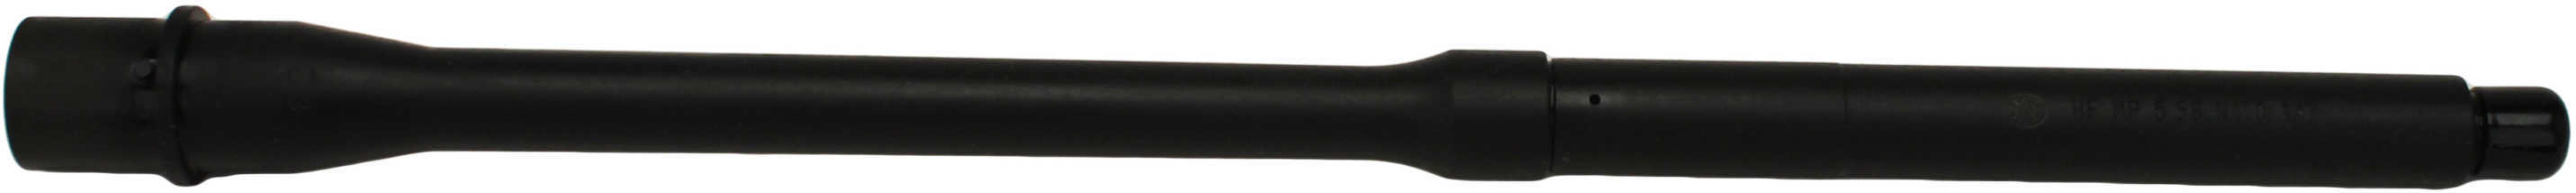 FN 36422 AR-15 5.56X45mm Nato 16" Mid Length Gas System, Black Phosphate Cold Hammer Forged Chrome Lined